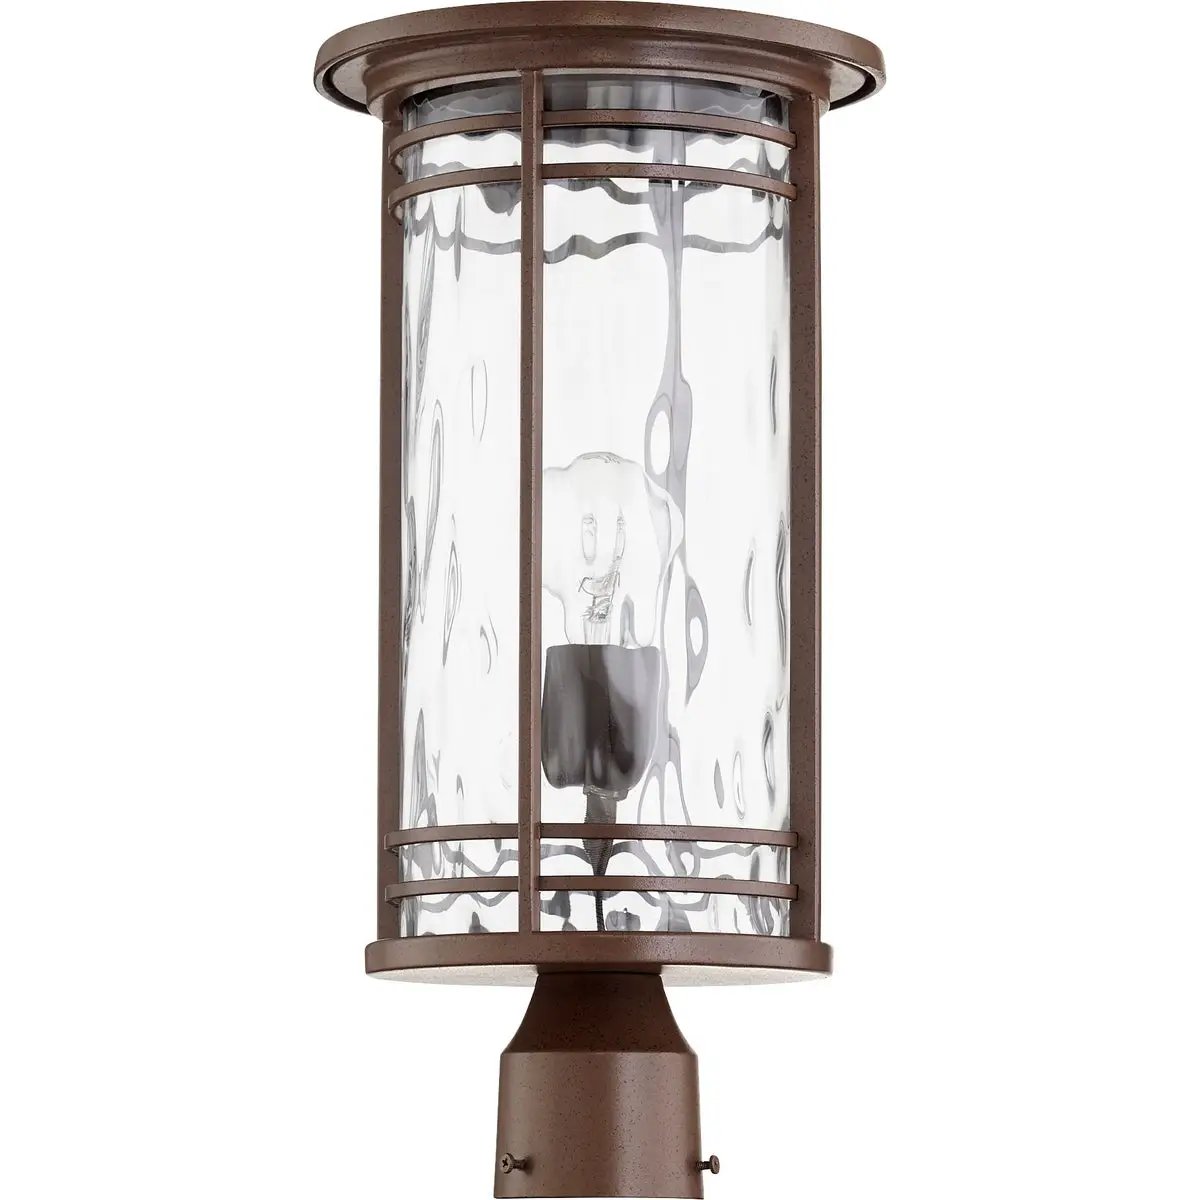 Modern Outdoor Post Light with clear glass shade, clean-lined silhouette, and oiled bronze finish. Casts a beautiful glow for both form and function. Brand: Quorum International. Wattage: 100W. Input Voltage: 120V. Bulbs: 1 (not included). Bulb Base Type: Medium E26. Dimmable. Certifications: UL Listed. Safety Rating: Wet Location. Dimensions: 9.25"W x 18.75"H. Warranty: 2 Years.